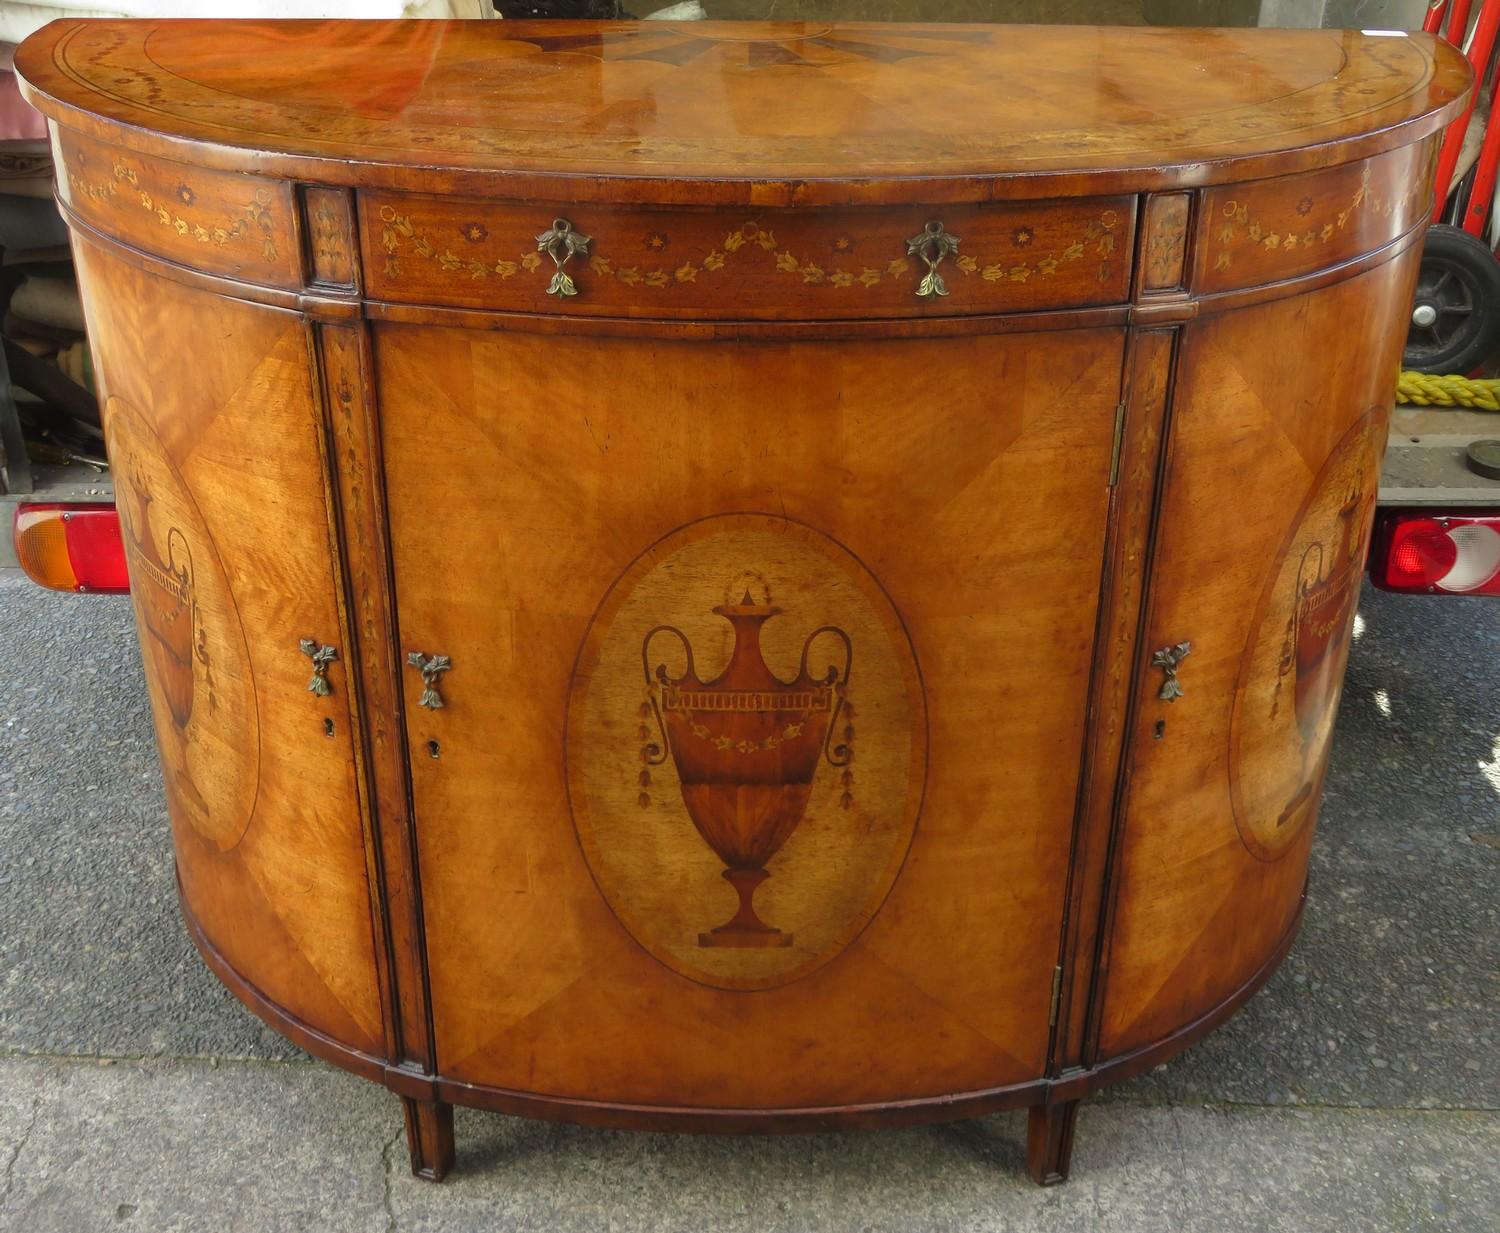 Early/mid 20th century walnut veneered half moon side cabinet, inlaid in the French manner with